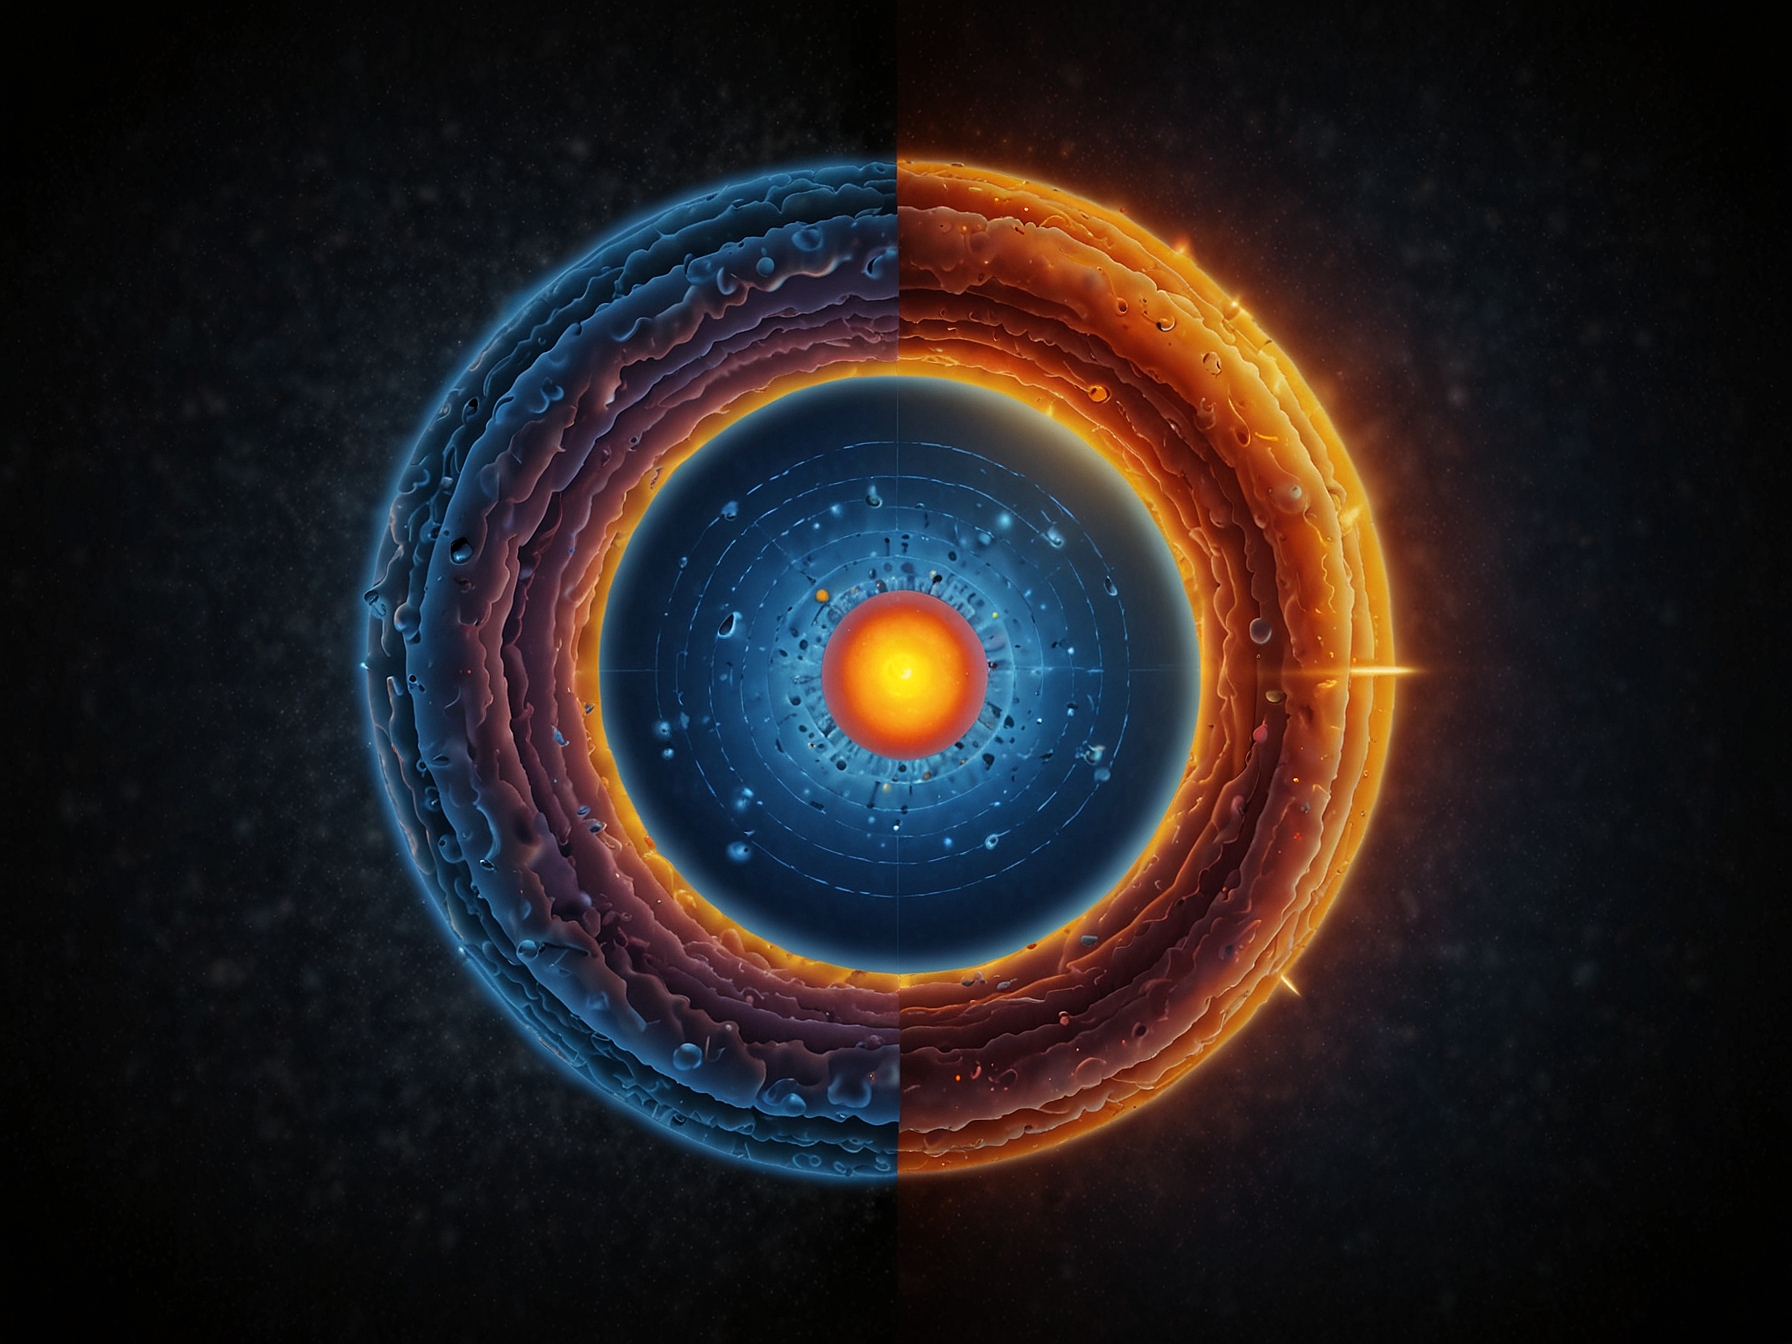 An illustration of Earth's inner and outer core, highlighting the difference in composition and rotation. The inner core is shown as solid, while the outer core is molten, both contributing to the magnetic field.